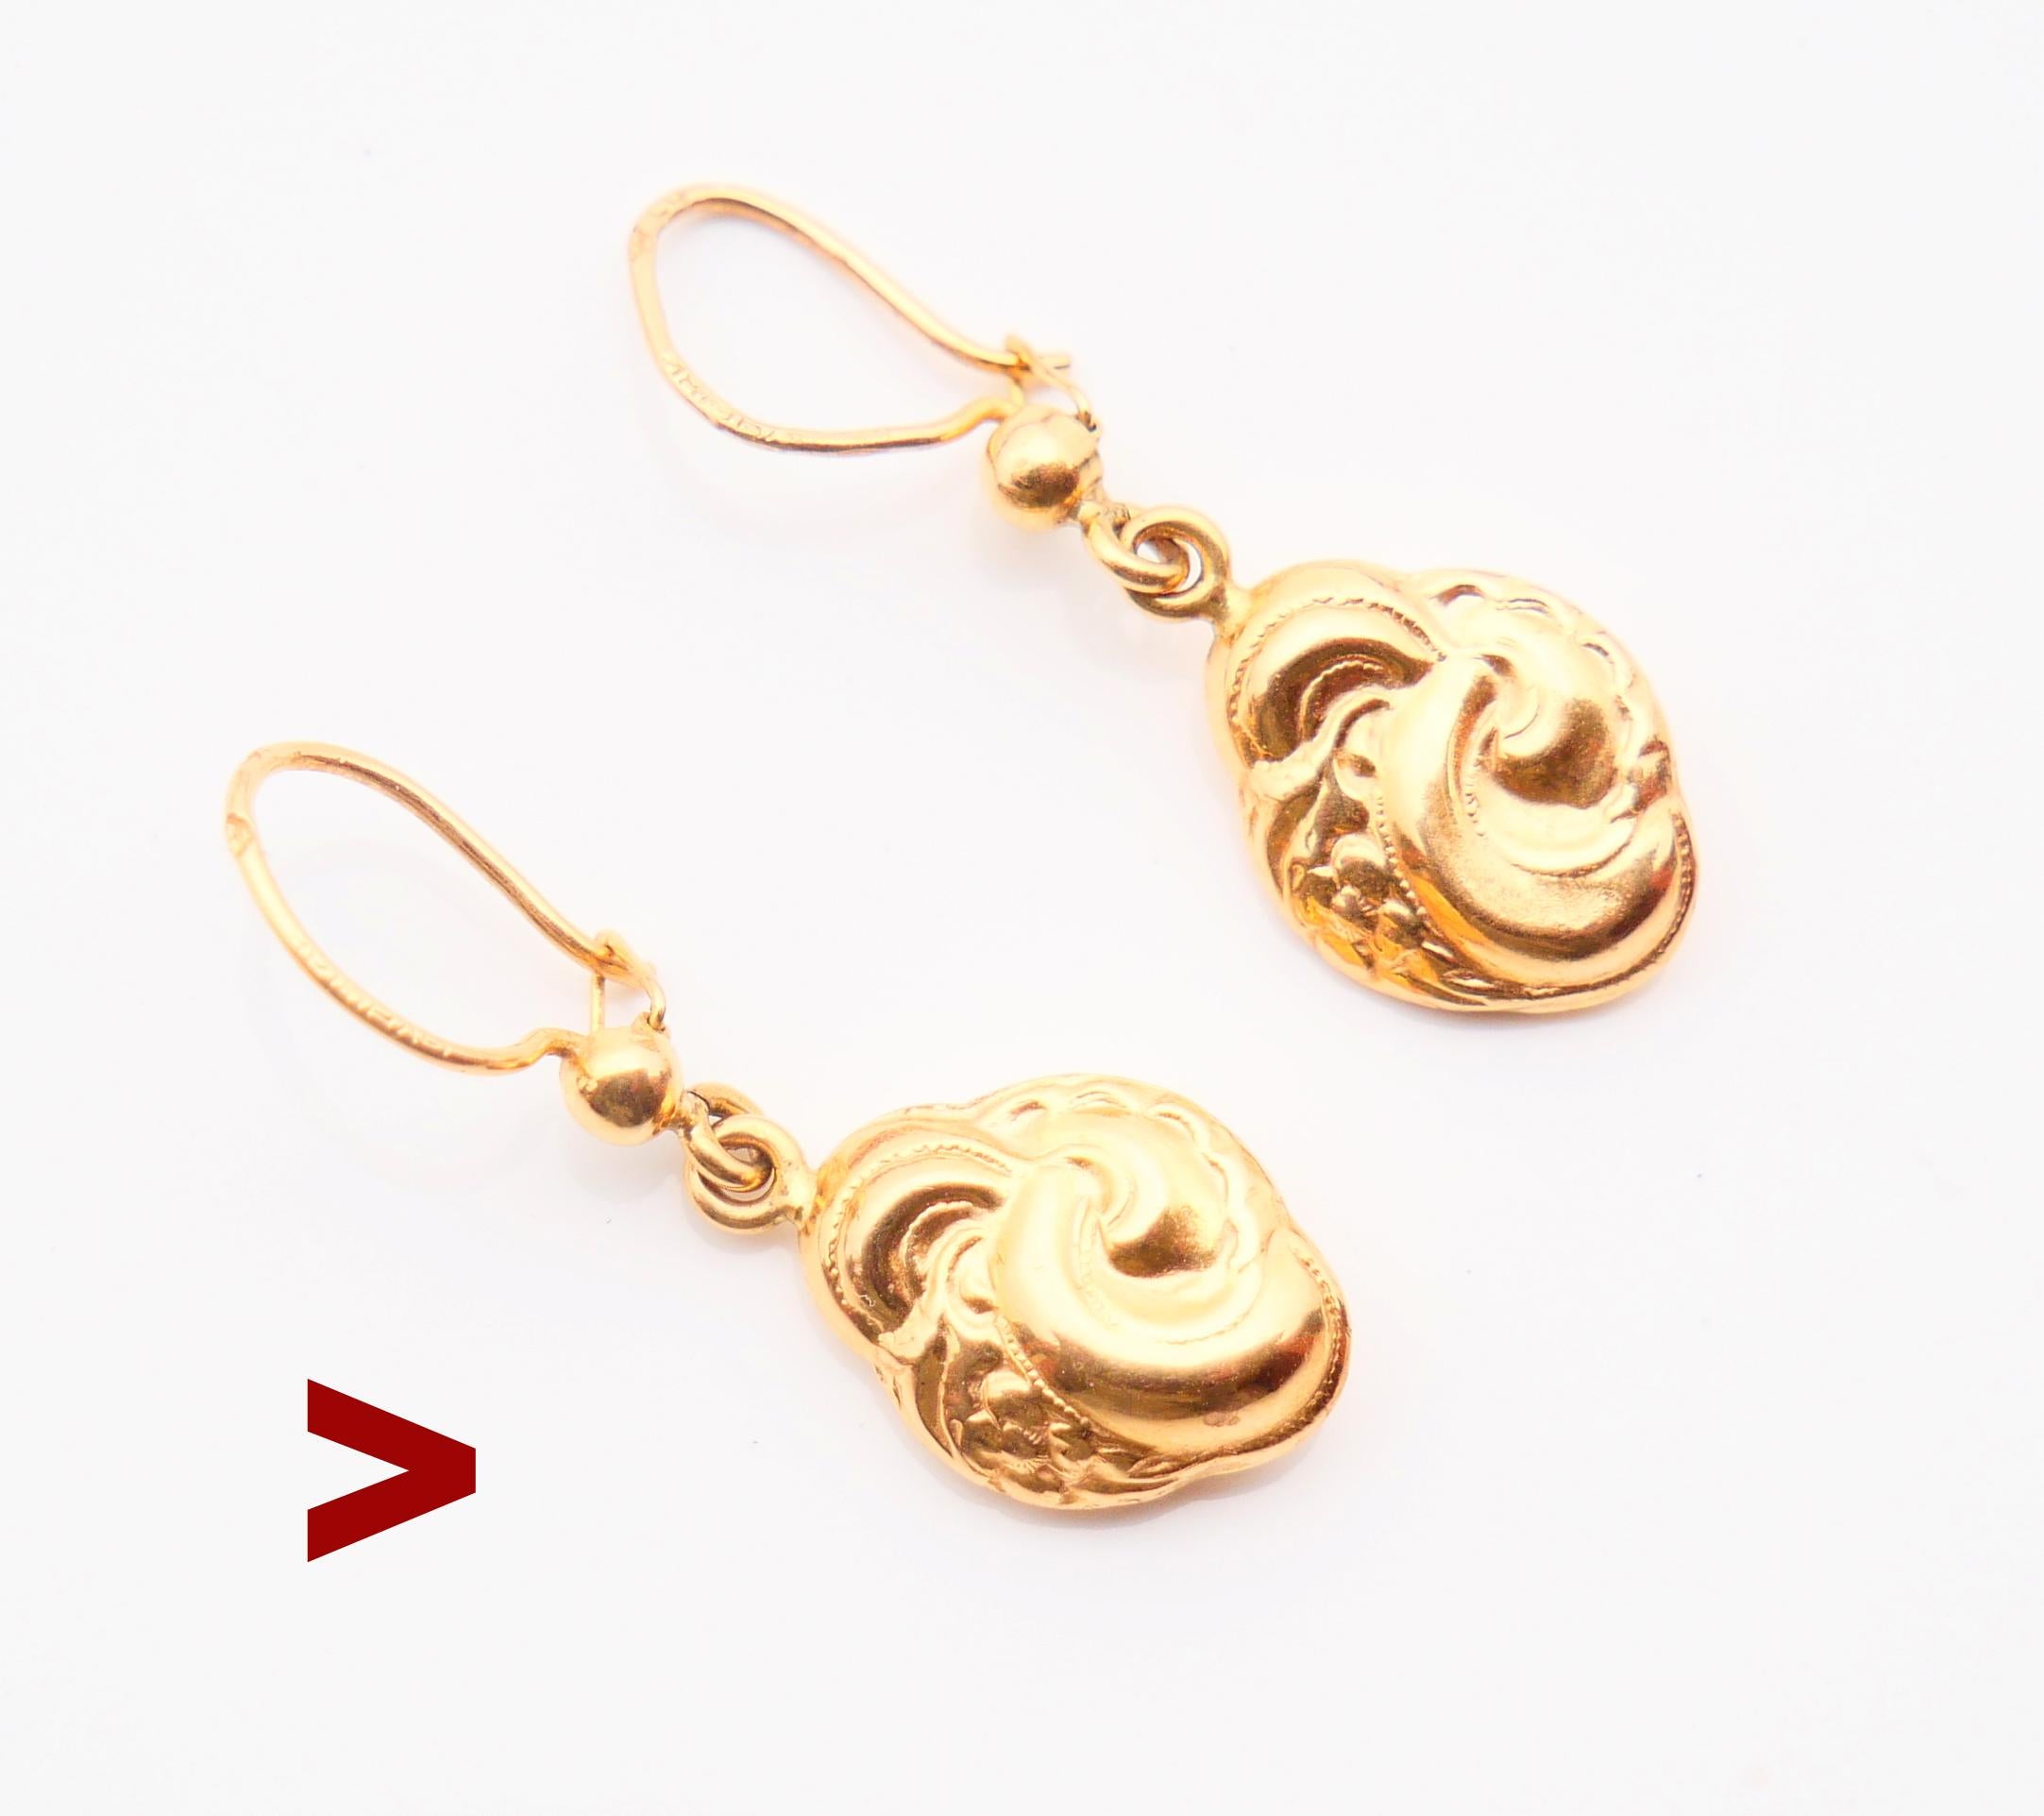 A pair of hollow cast pendants dangles in solid 18K Yellow Gold with cast identical voluptuous floral ornaments on both sides.

Hallmarked 18K , Swedish maker's hallmarks. Hallmarks are not clear to read. Made ca.1920-1940s.

Each earring is about